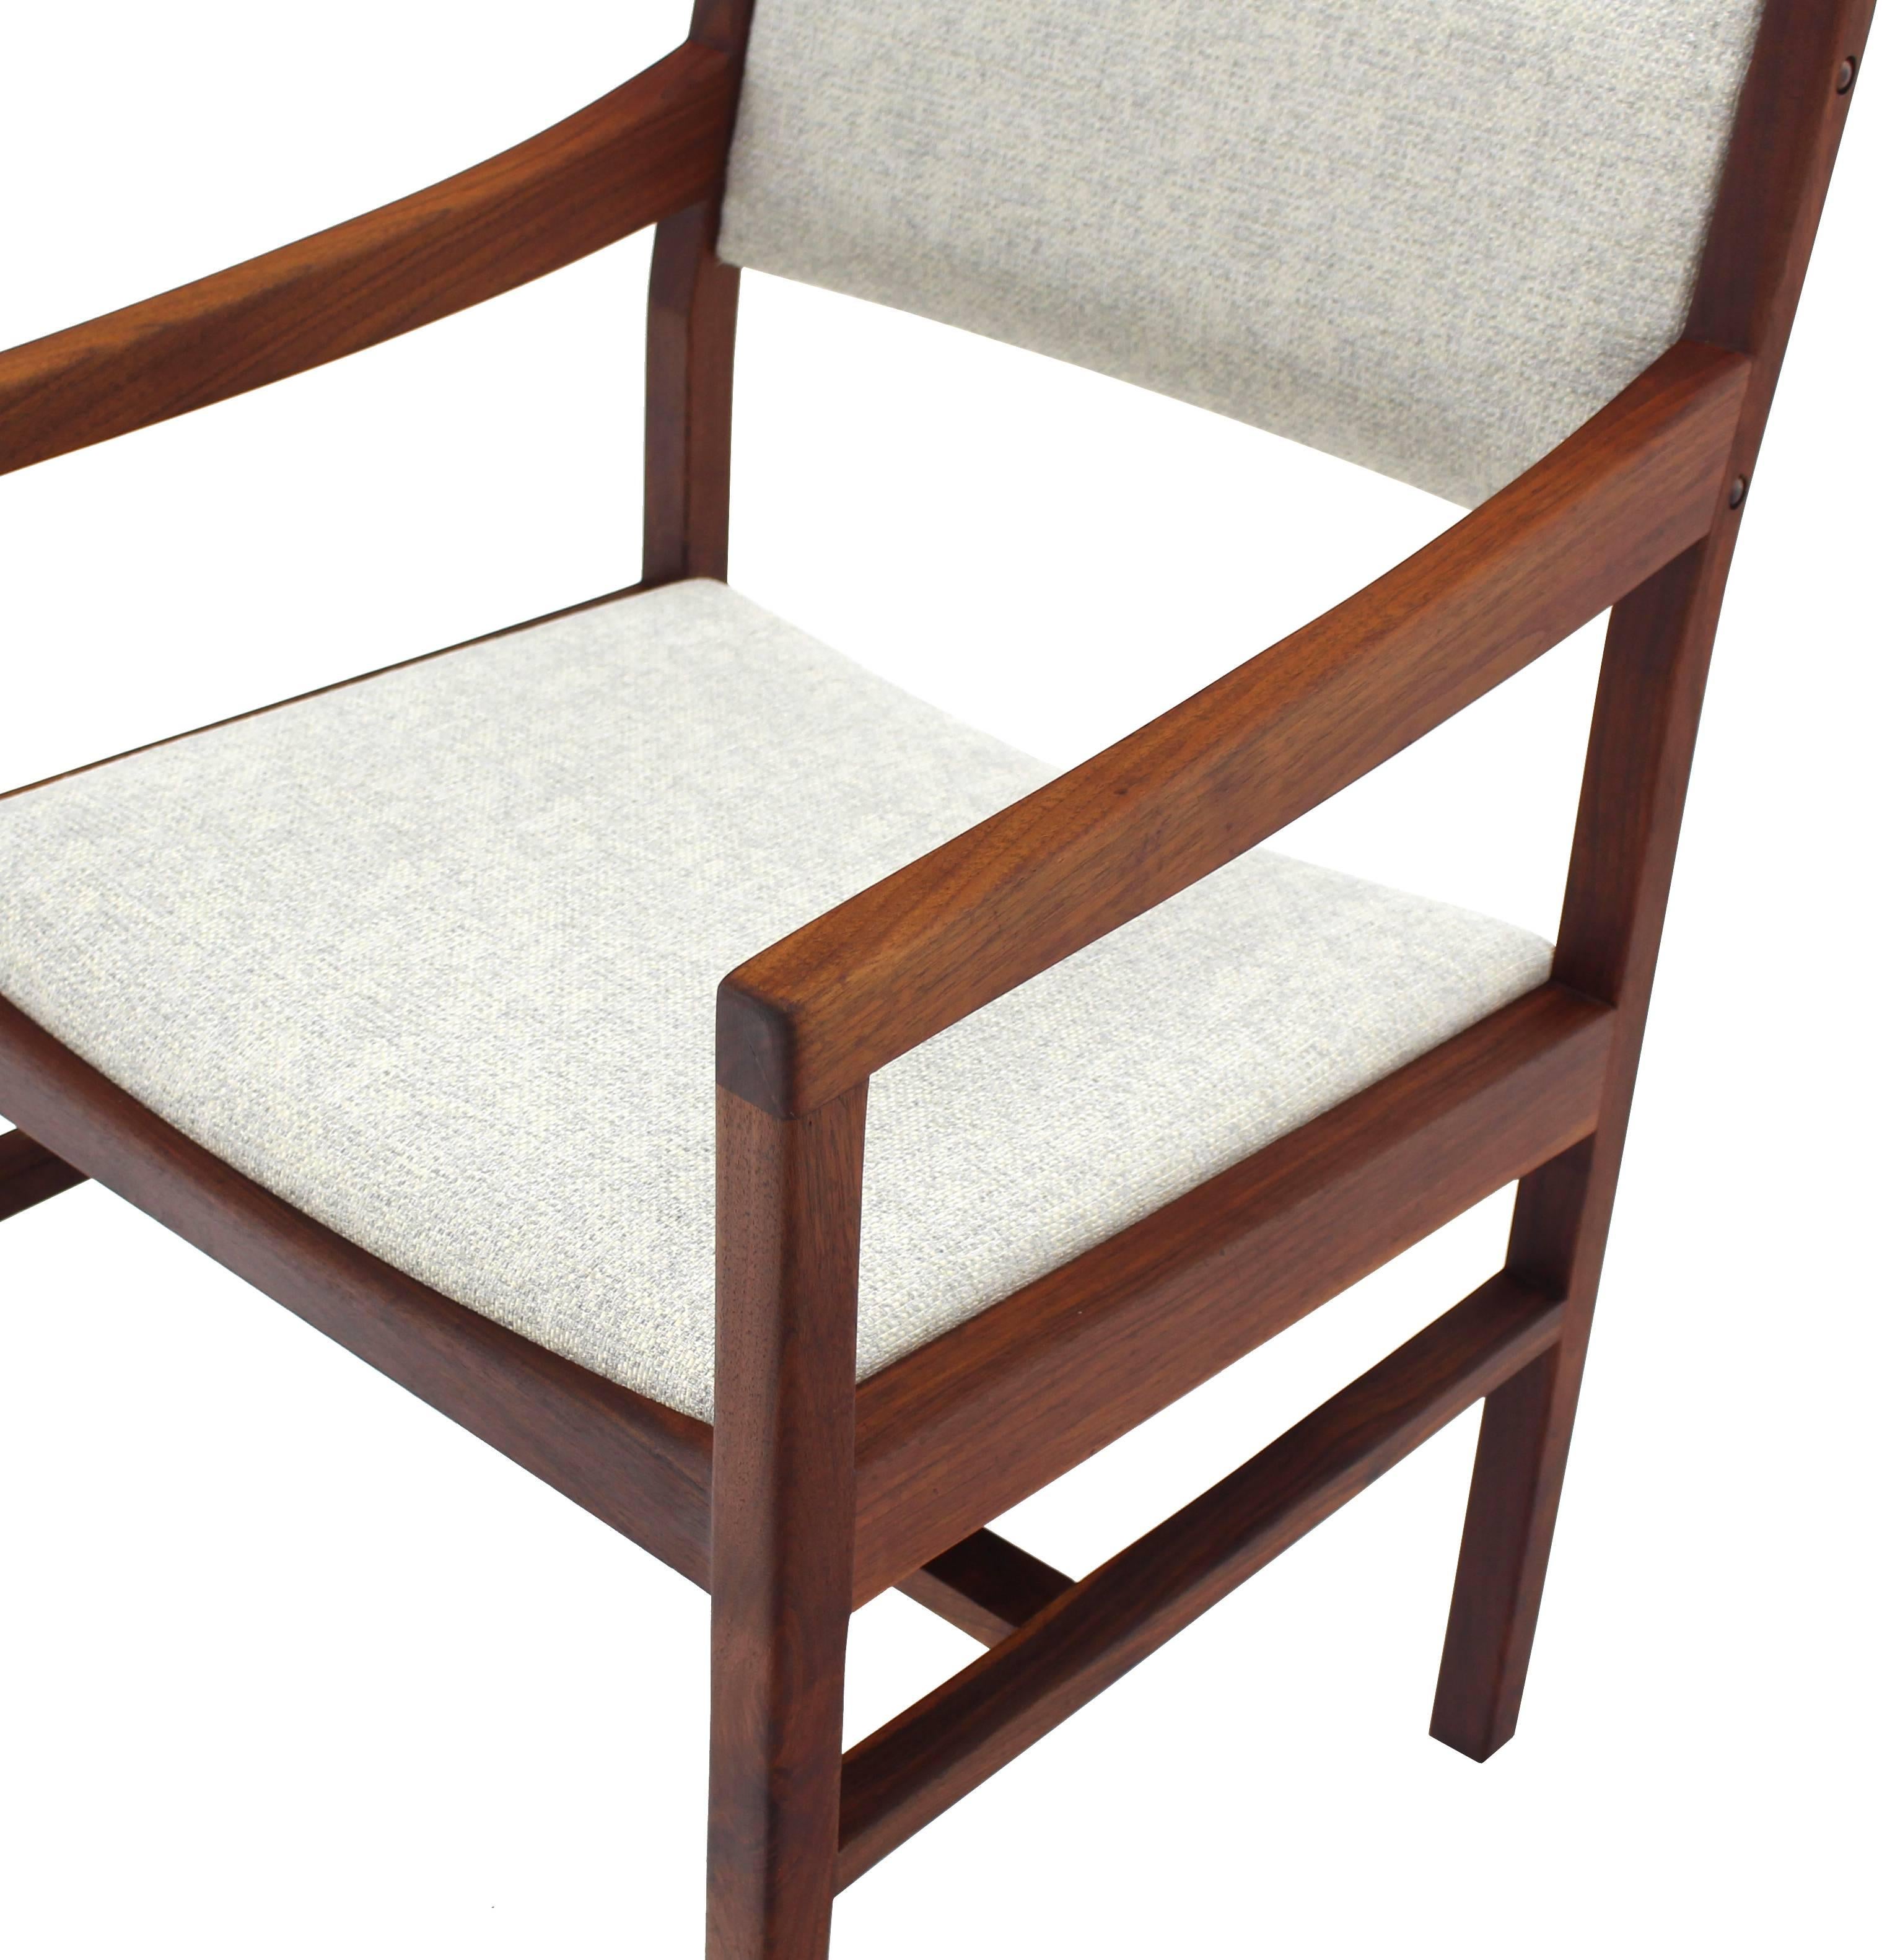 Pair of Oiled Walnut Armchairs New Upholstery In Excellent Condition For Sale In Rockaway, NJ